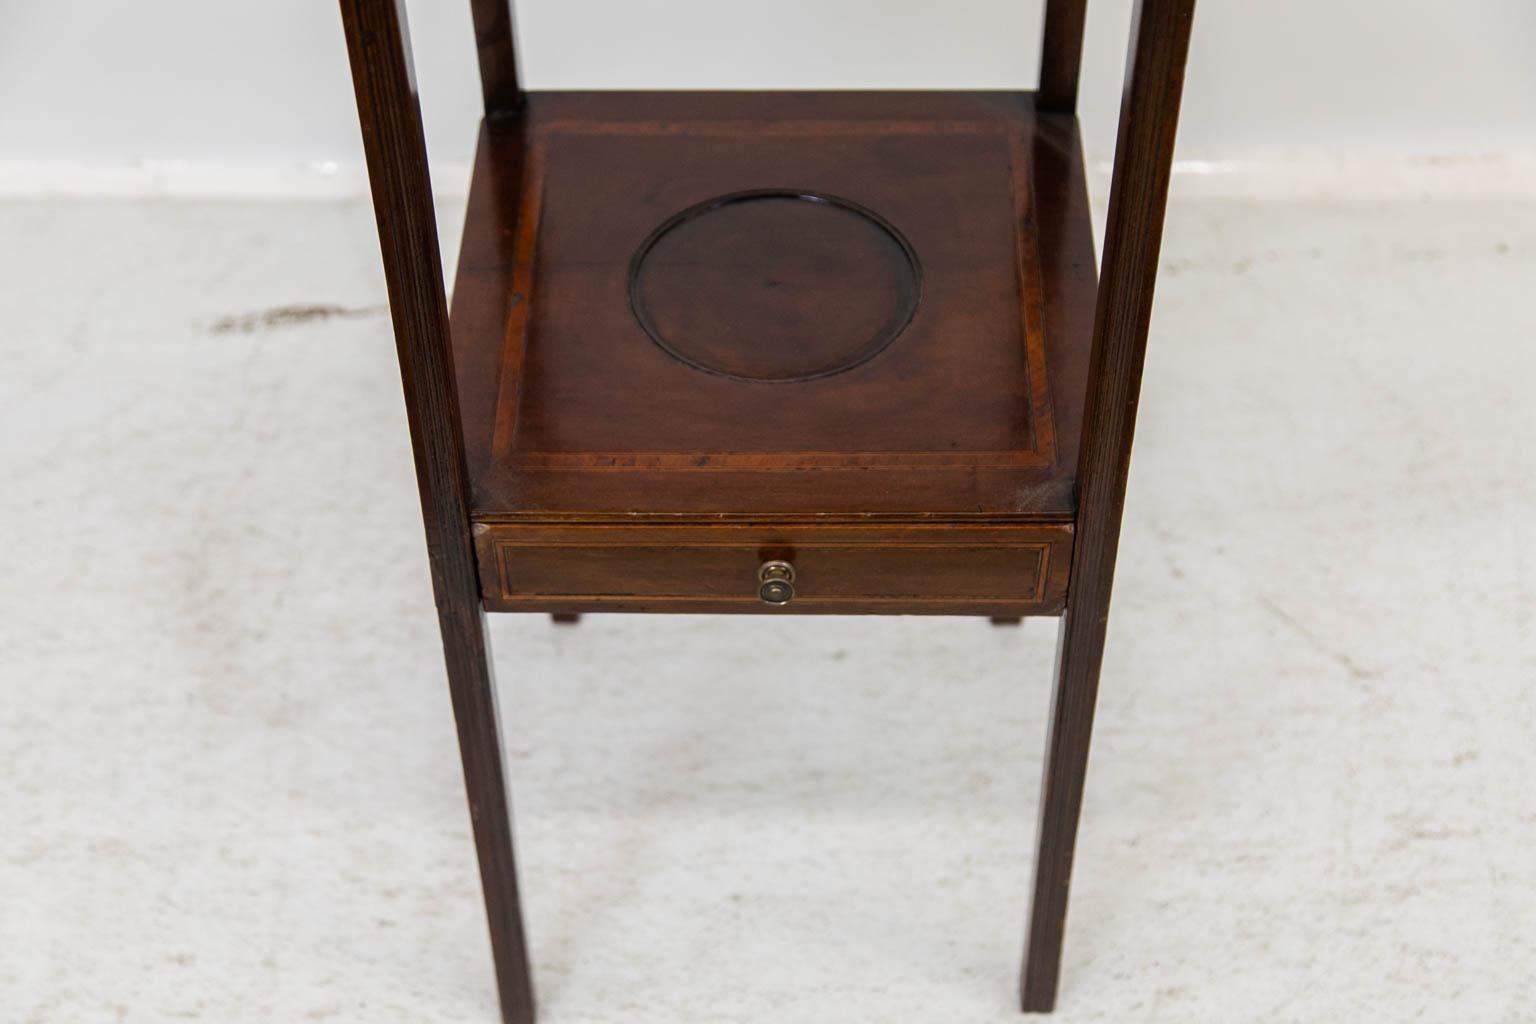 The top of this mahogany table has a molded bullnose edge and is banded with a satinwood and ebony border. There are quarter fans in the corners of the border and an oval shell paterie framed by a marquee inlay band. The lower shelf has an incised